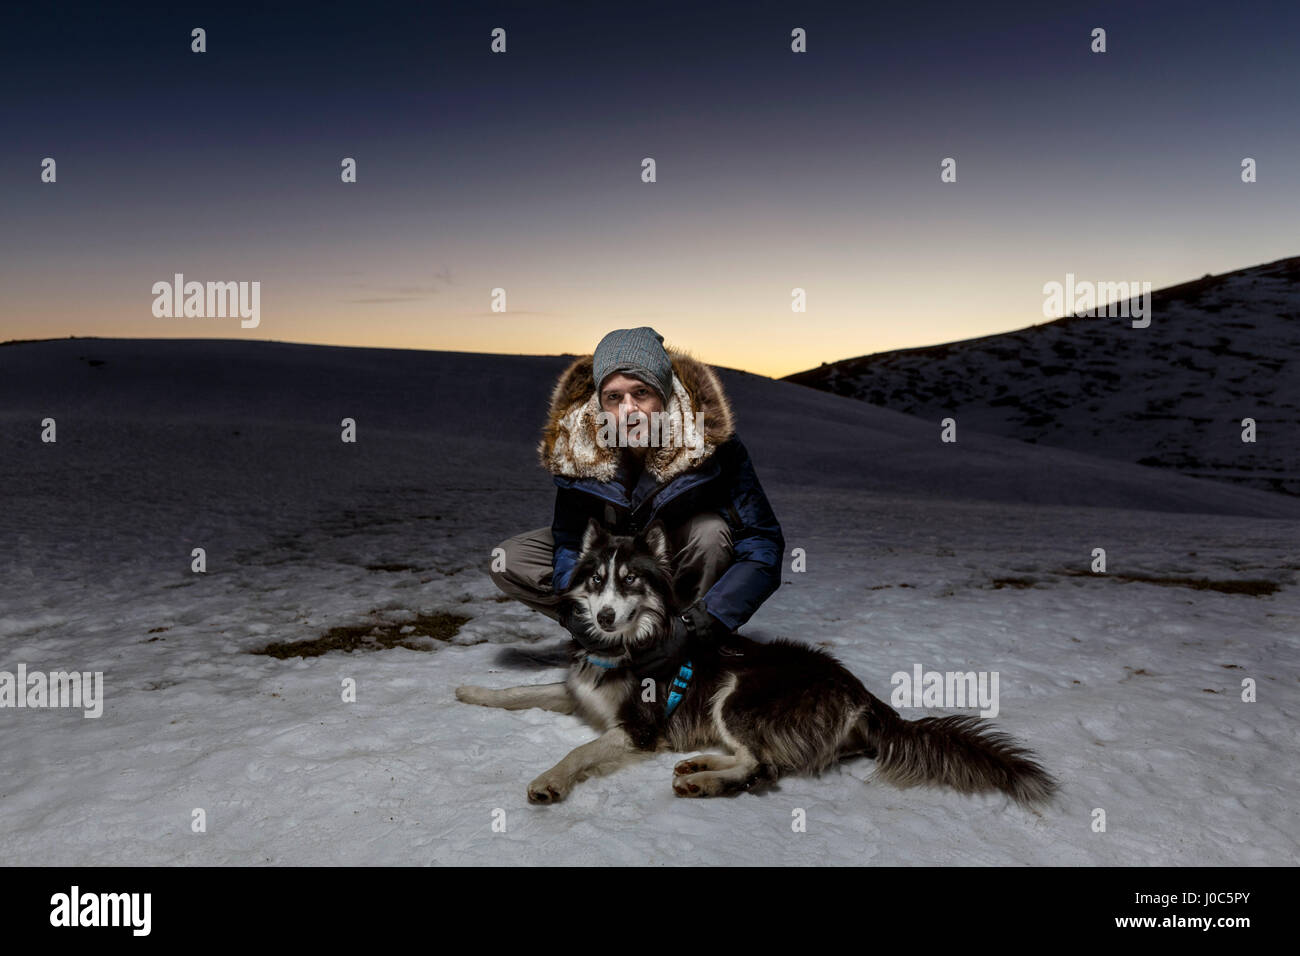 Portrait of mature man crouching with dog in snow at night Stock Photo